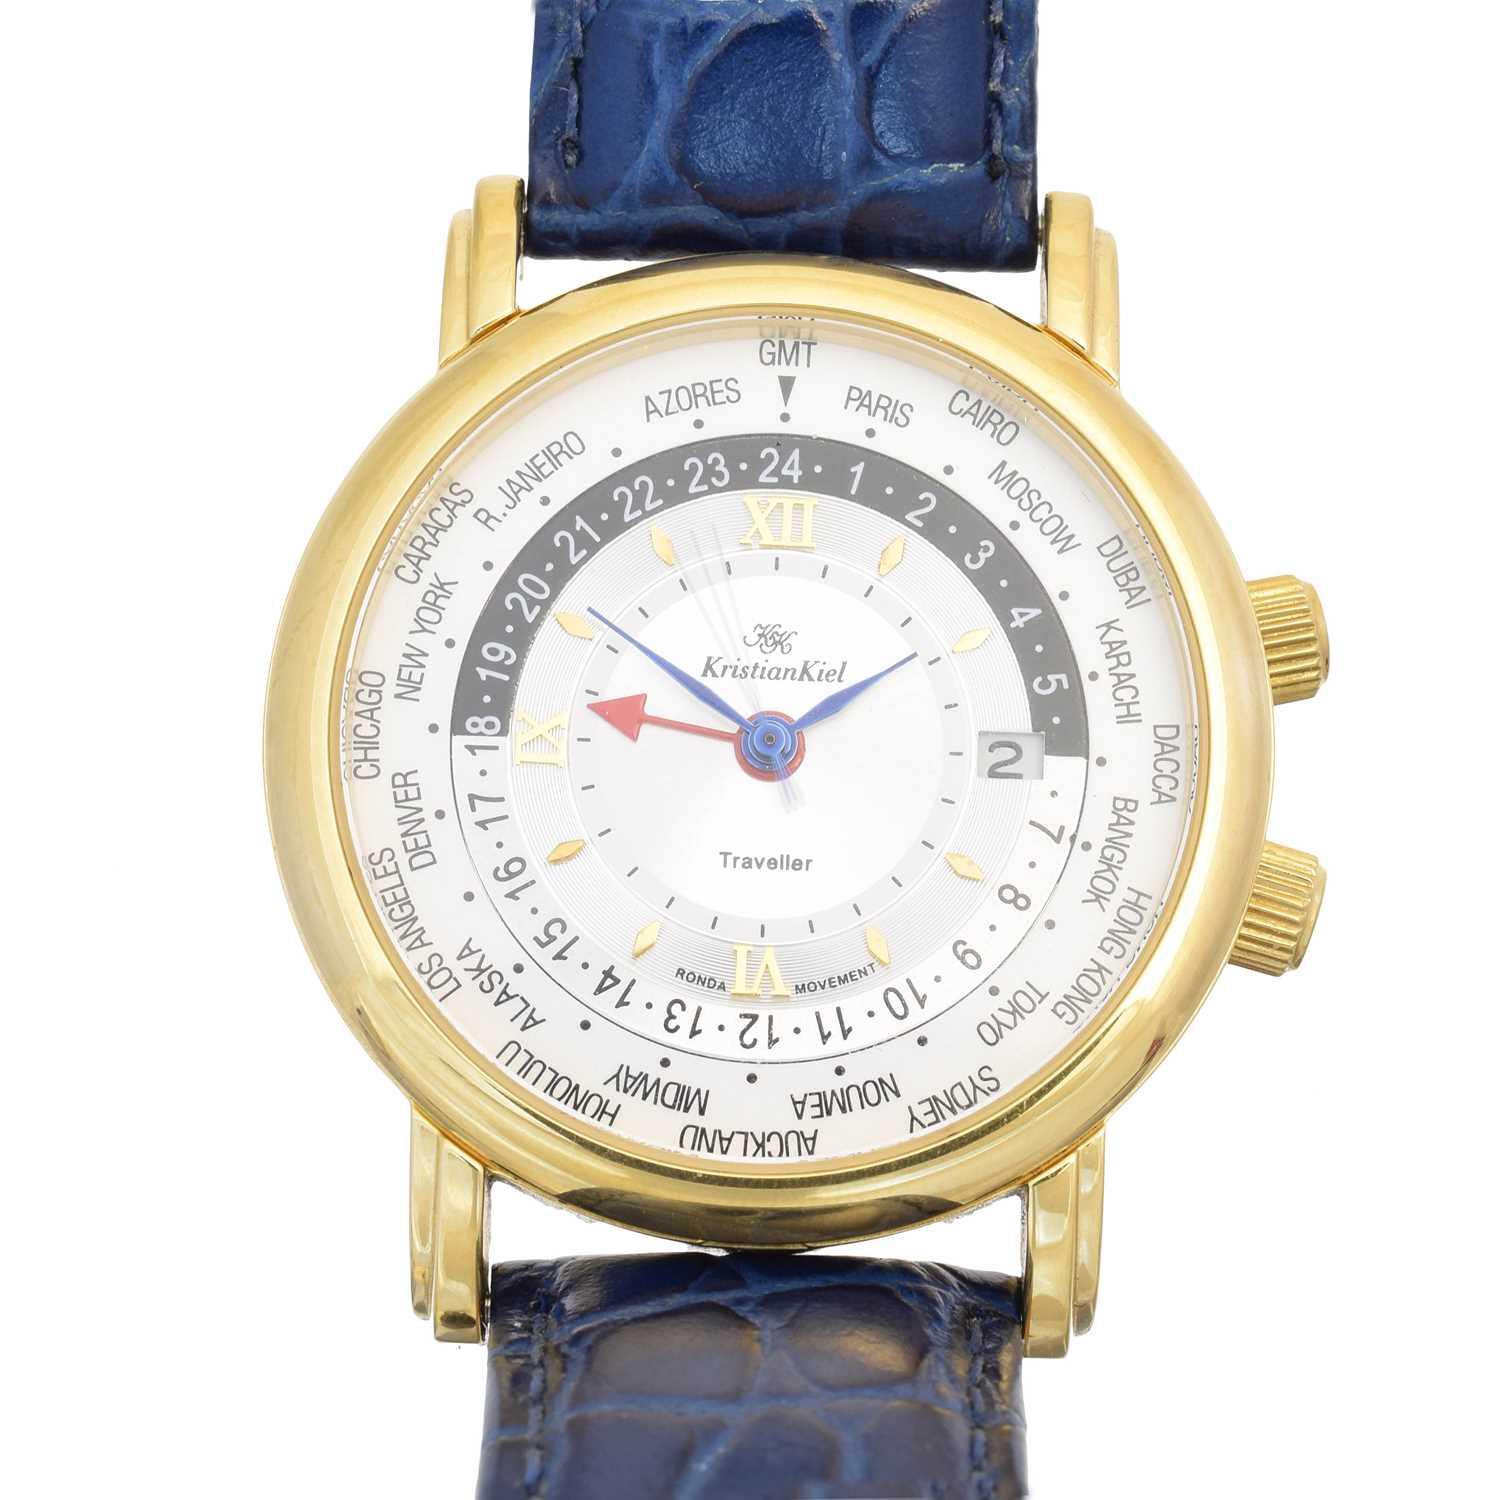 Lot 134 - A stainless steel and gold plated Kristian Kiel Traveller watch